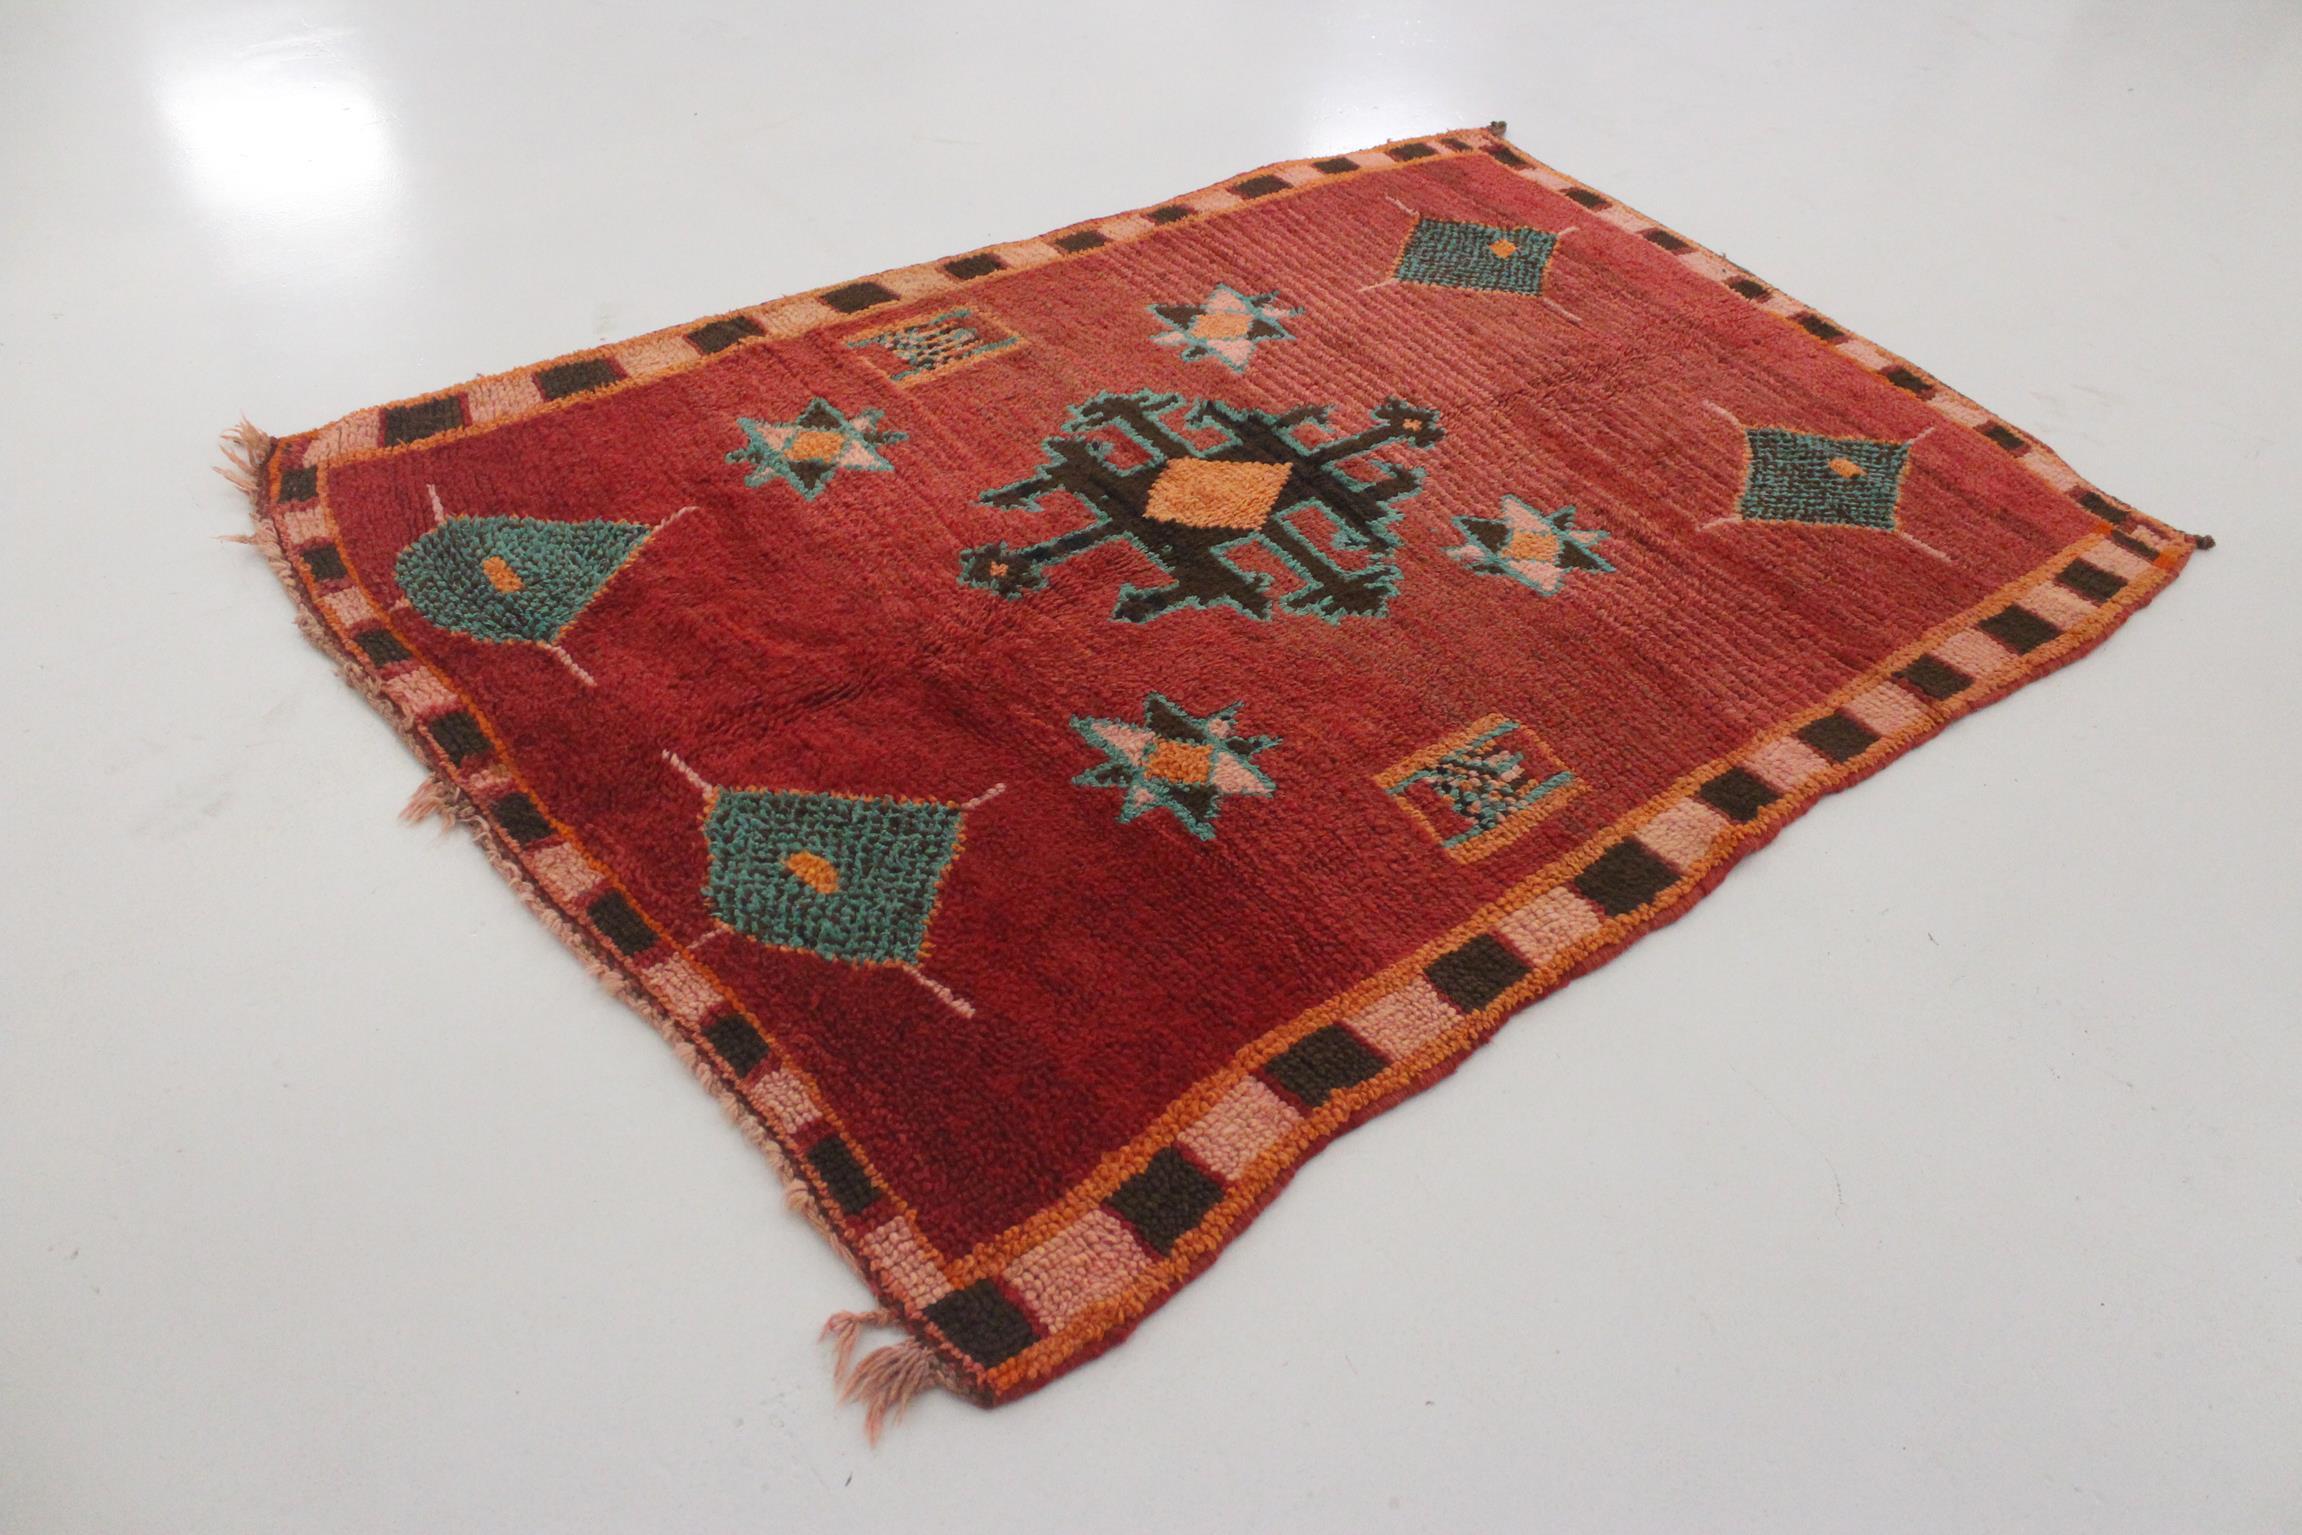 Hand-Woven Vintage Moroccan Azilal rug - Red and turquoise - 4.1x5.8feet / 127x177cm For Sale